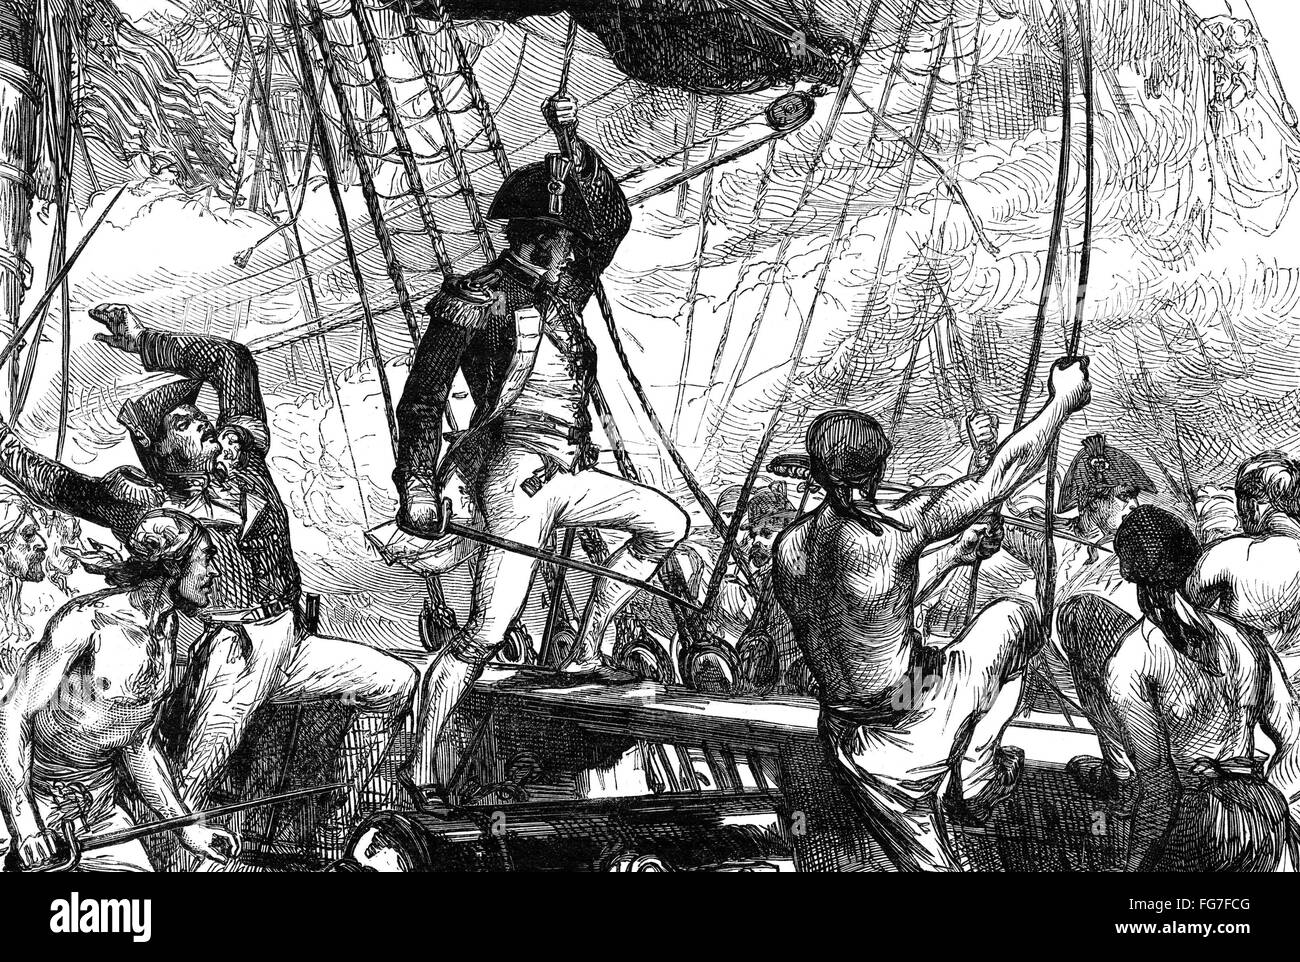 WAR OF 1812: NAVAL BATTLE. /nThe capture of the HMS Frolic, under Commander Thomas Whinyates, during the battle with the American sloop-of-war USS Wasp, under the command of Jacob Jones, 18 October 1812. Engraving, American, 1881. Stock Photo